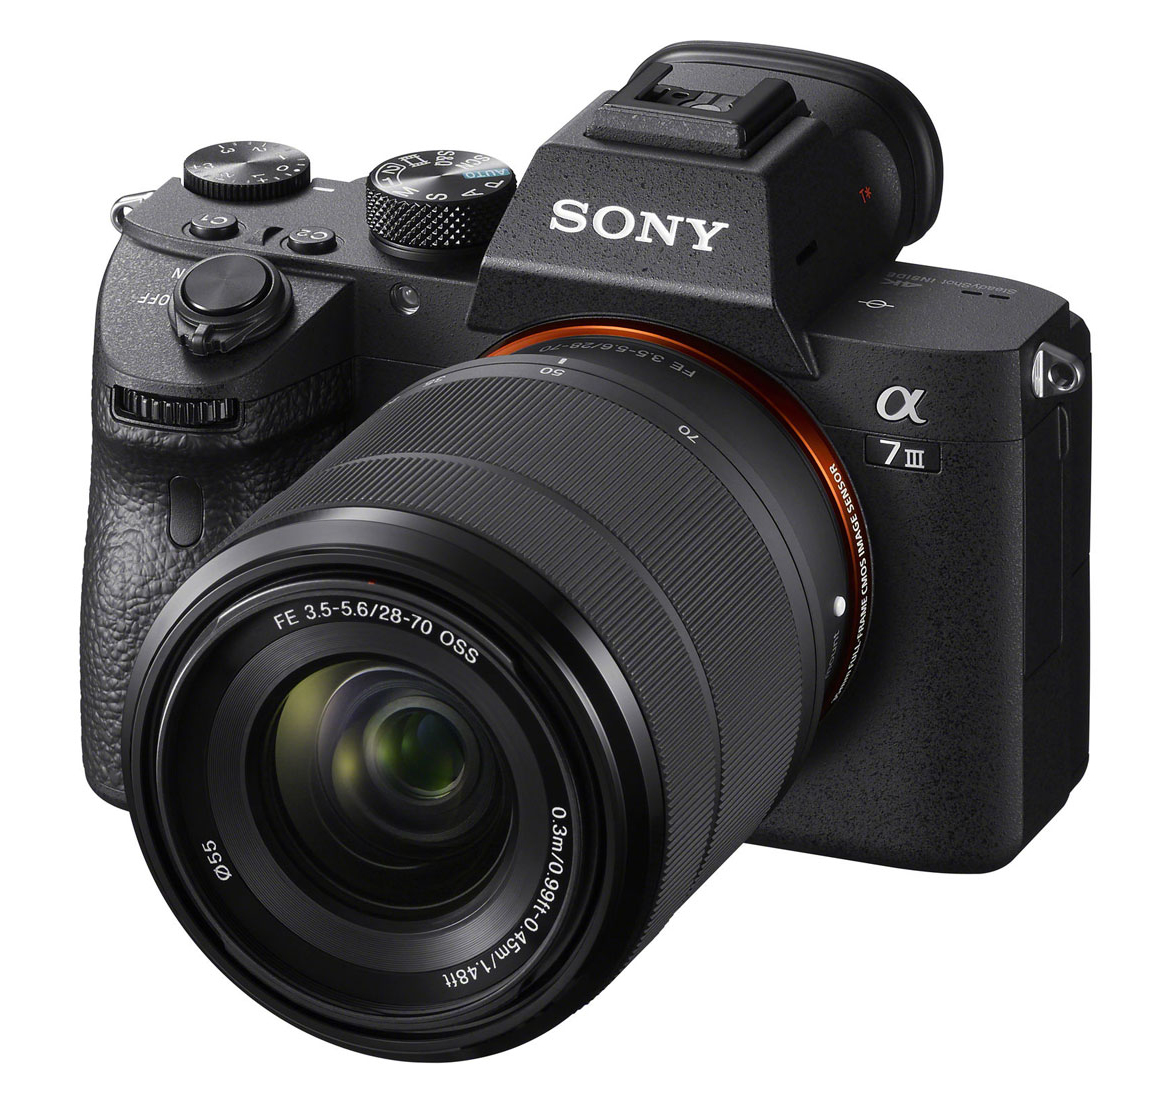 Sony Alpha Kit III Lens 28-70 F3.5-5.6 OSS Compass Camera with Full FE a7 Mirrorless 28-70mm Frame Systems | Full mm 24.2MP